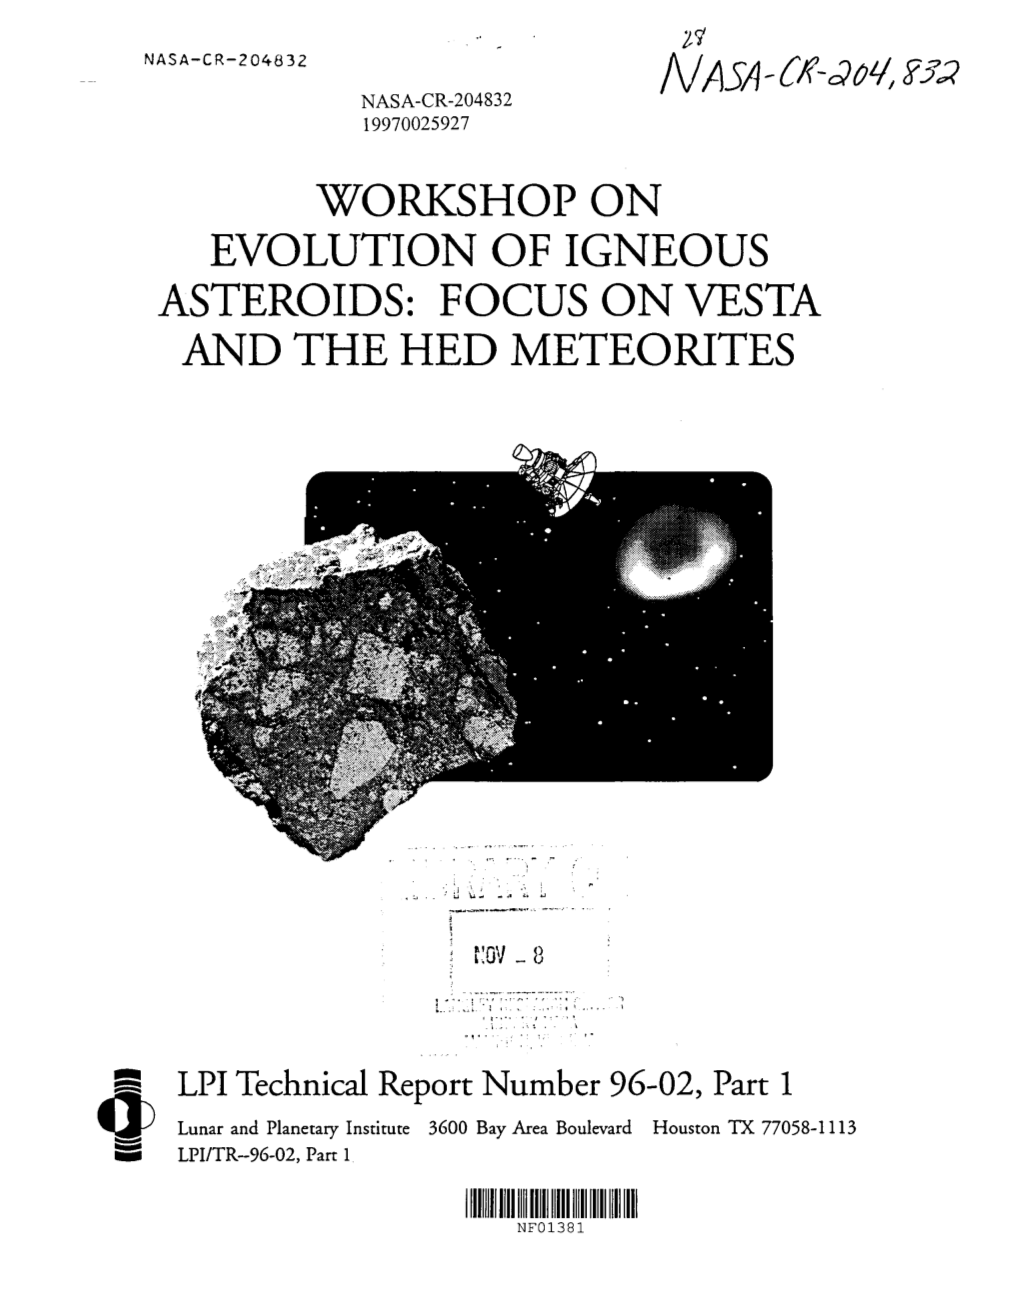 Evolution of Igneous Asteroids: Focus on Vesta and the Hed Meteorites